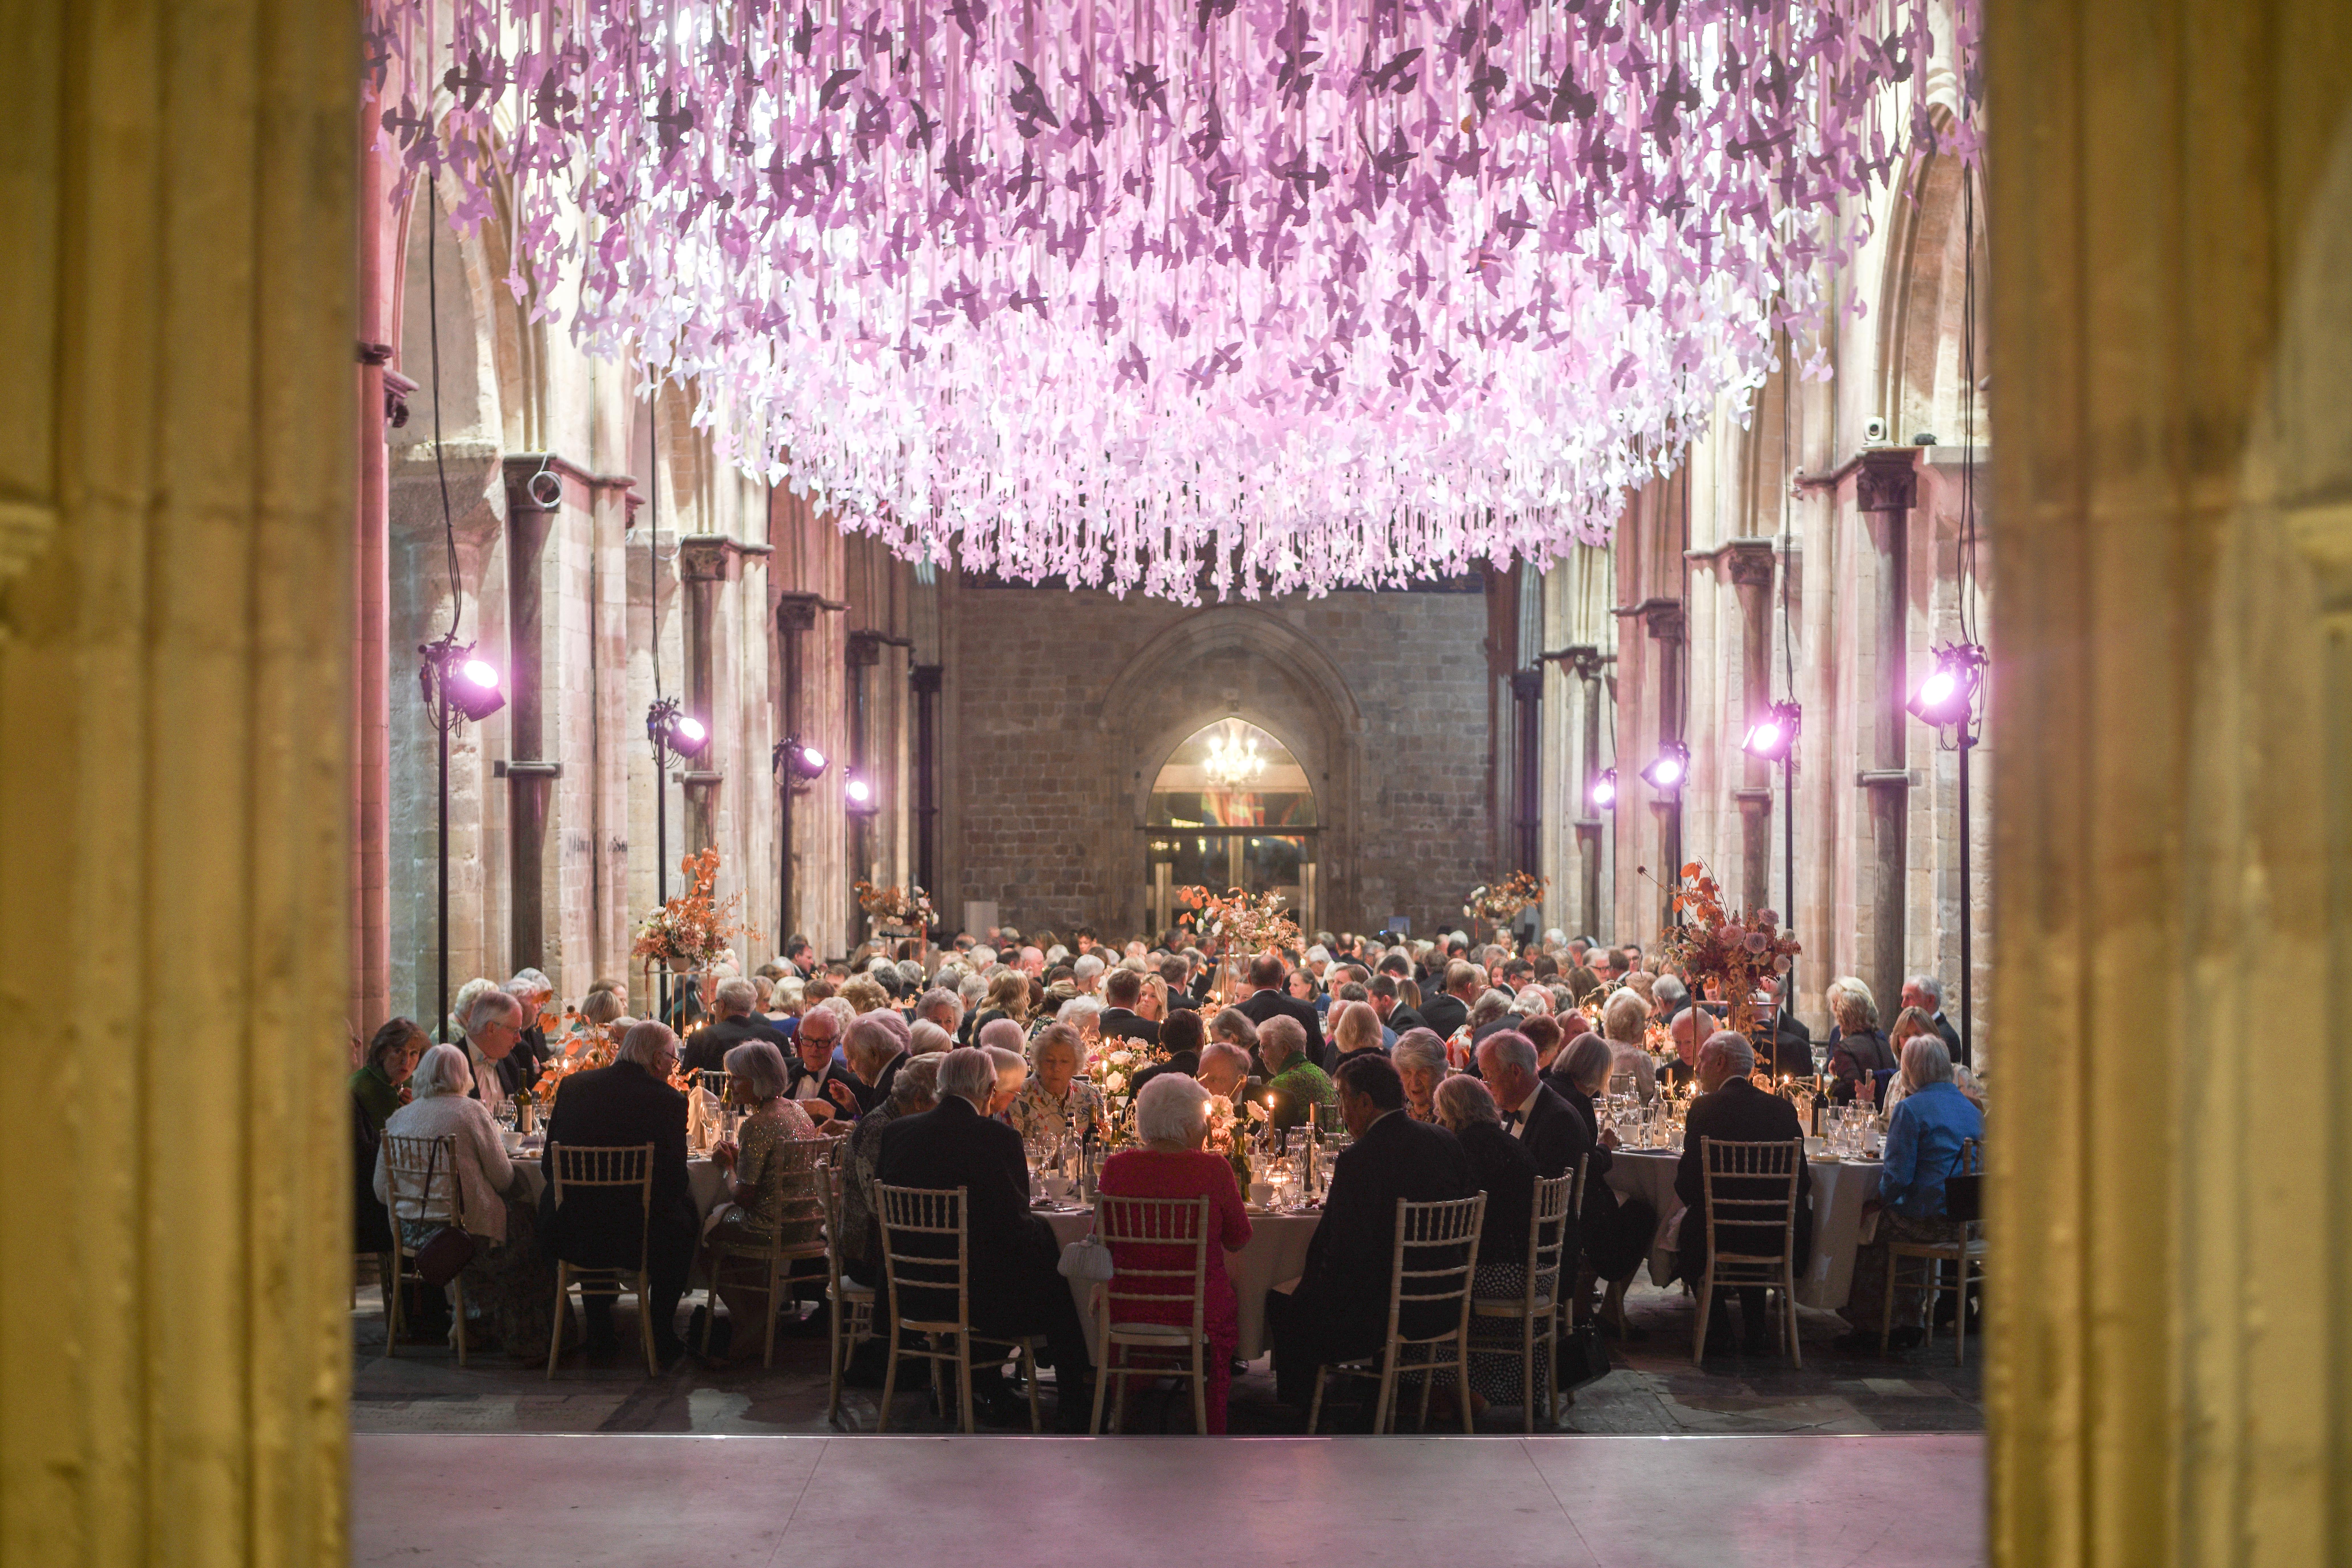 People dressed in formal attire sit around large tables in the Cathedral Nave, under purple Peace Doves